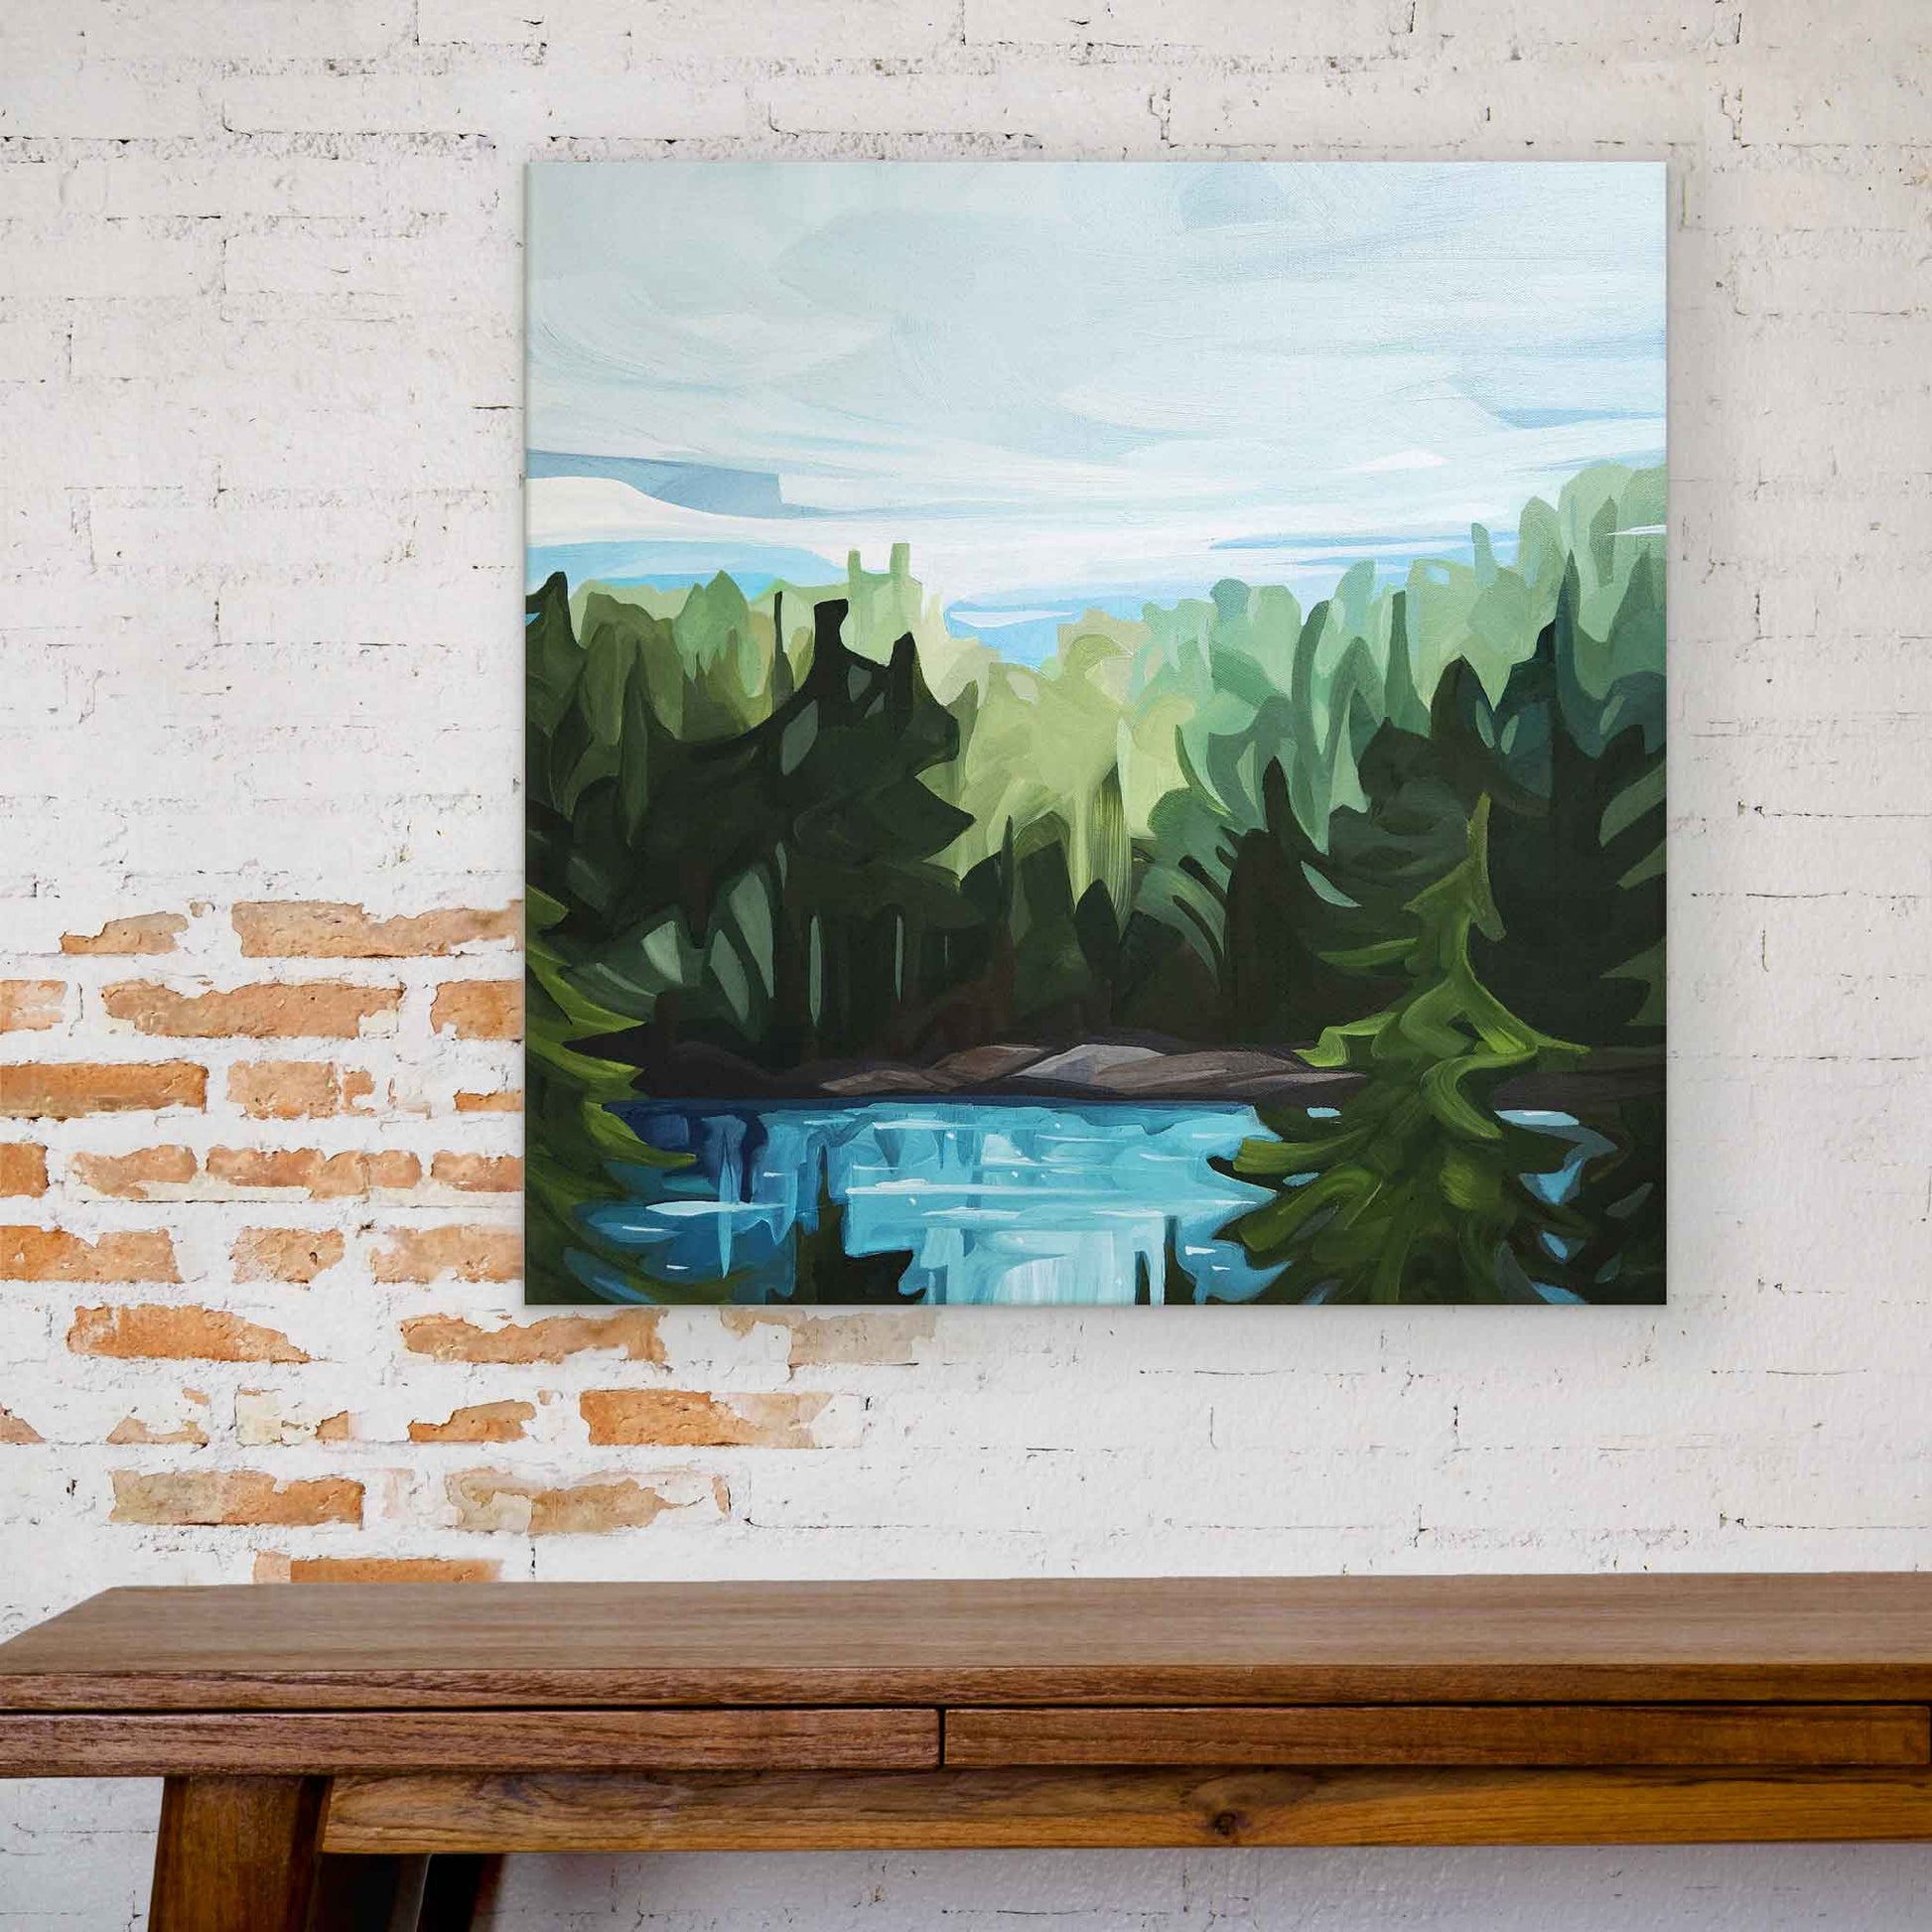 forest landscape fresh green forest painting on canvas hanging over table